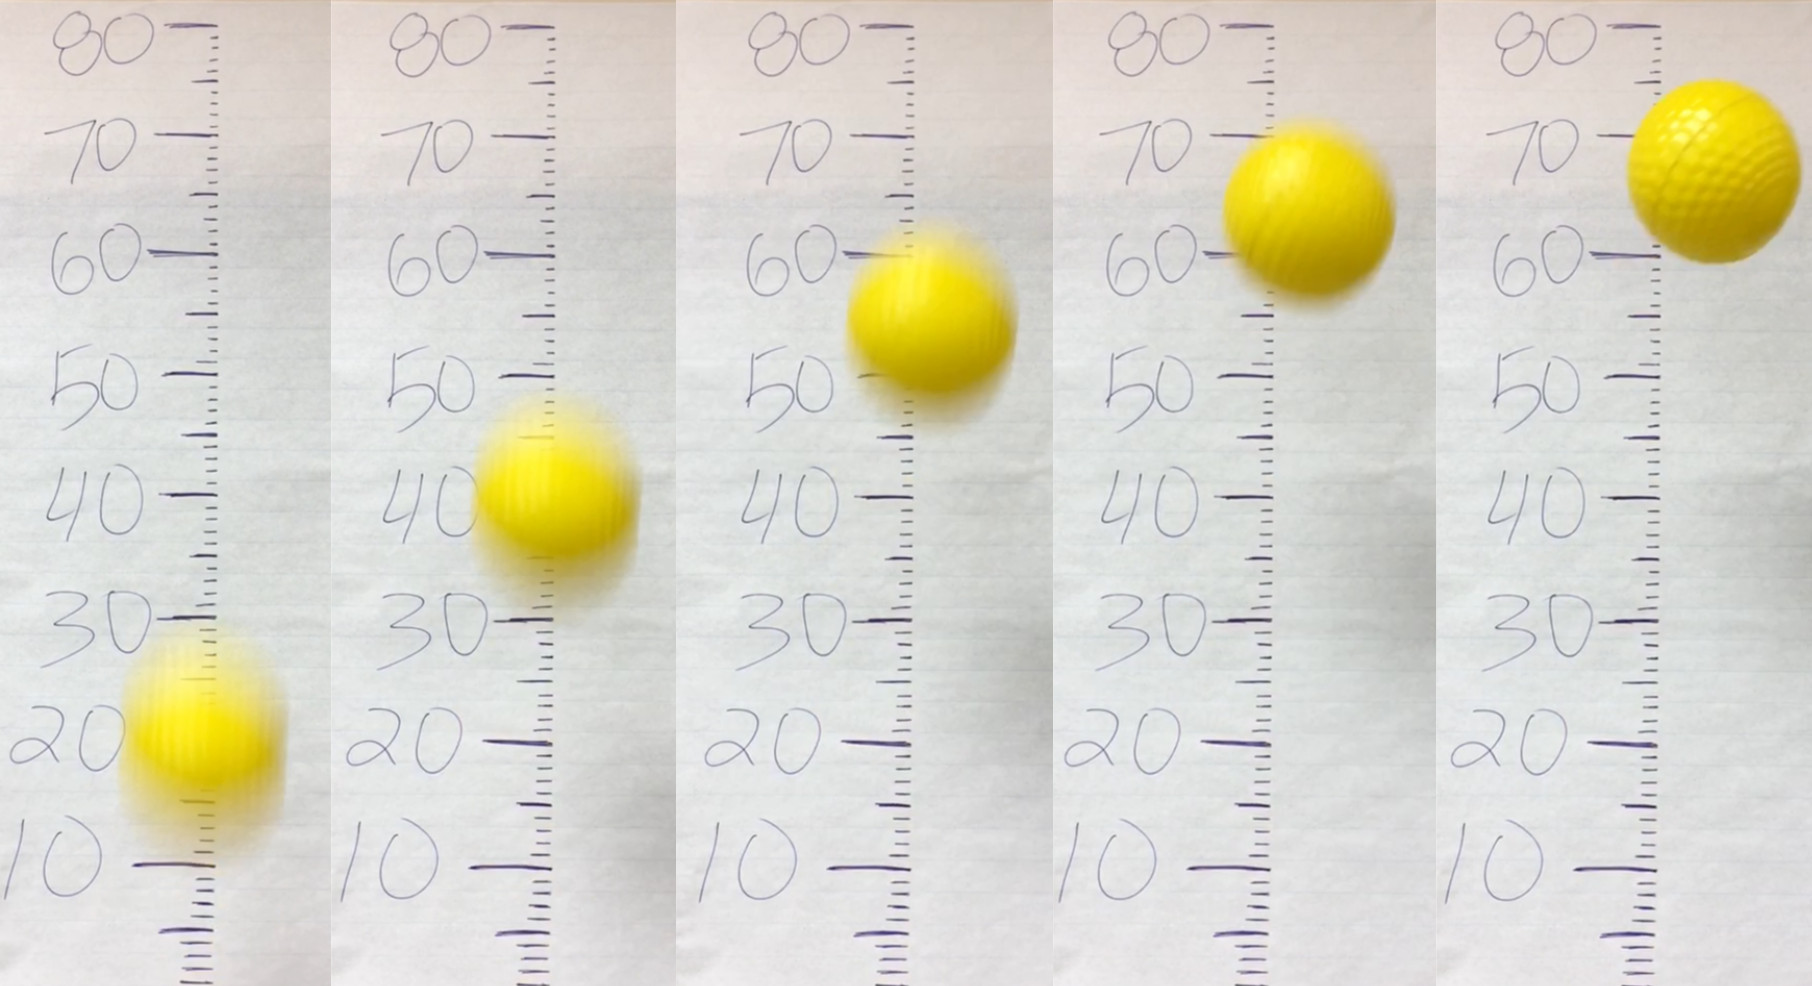 Shows several still images of a ball being tossed with the following heights: 20cm, 40cm, 55cm, 63cm, 67cm